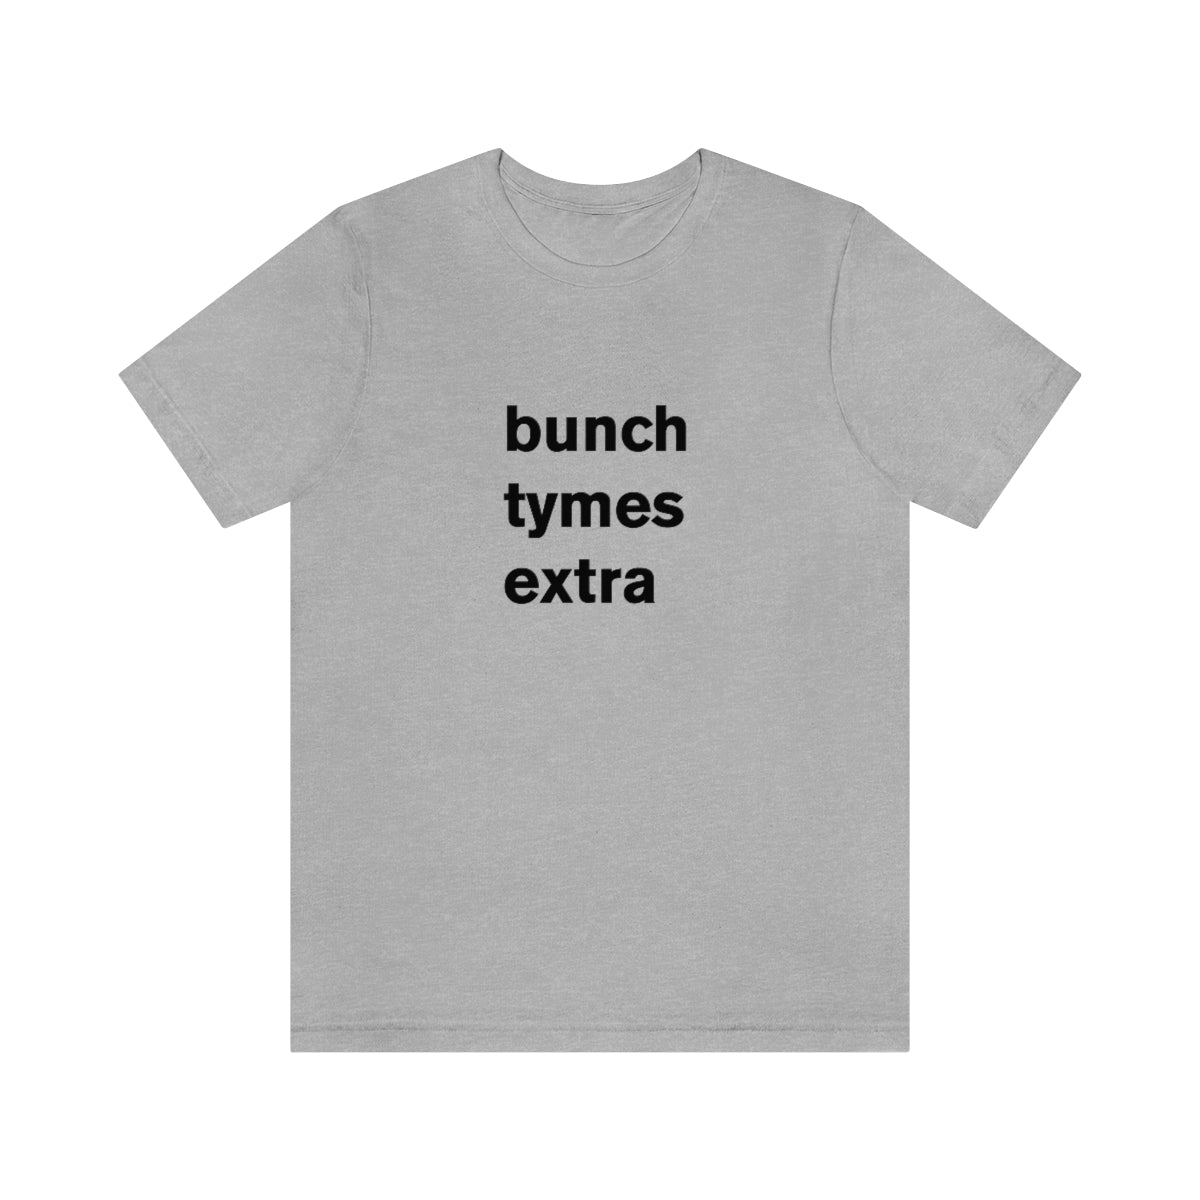 bunch tymes extra - t-shirt